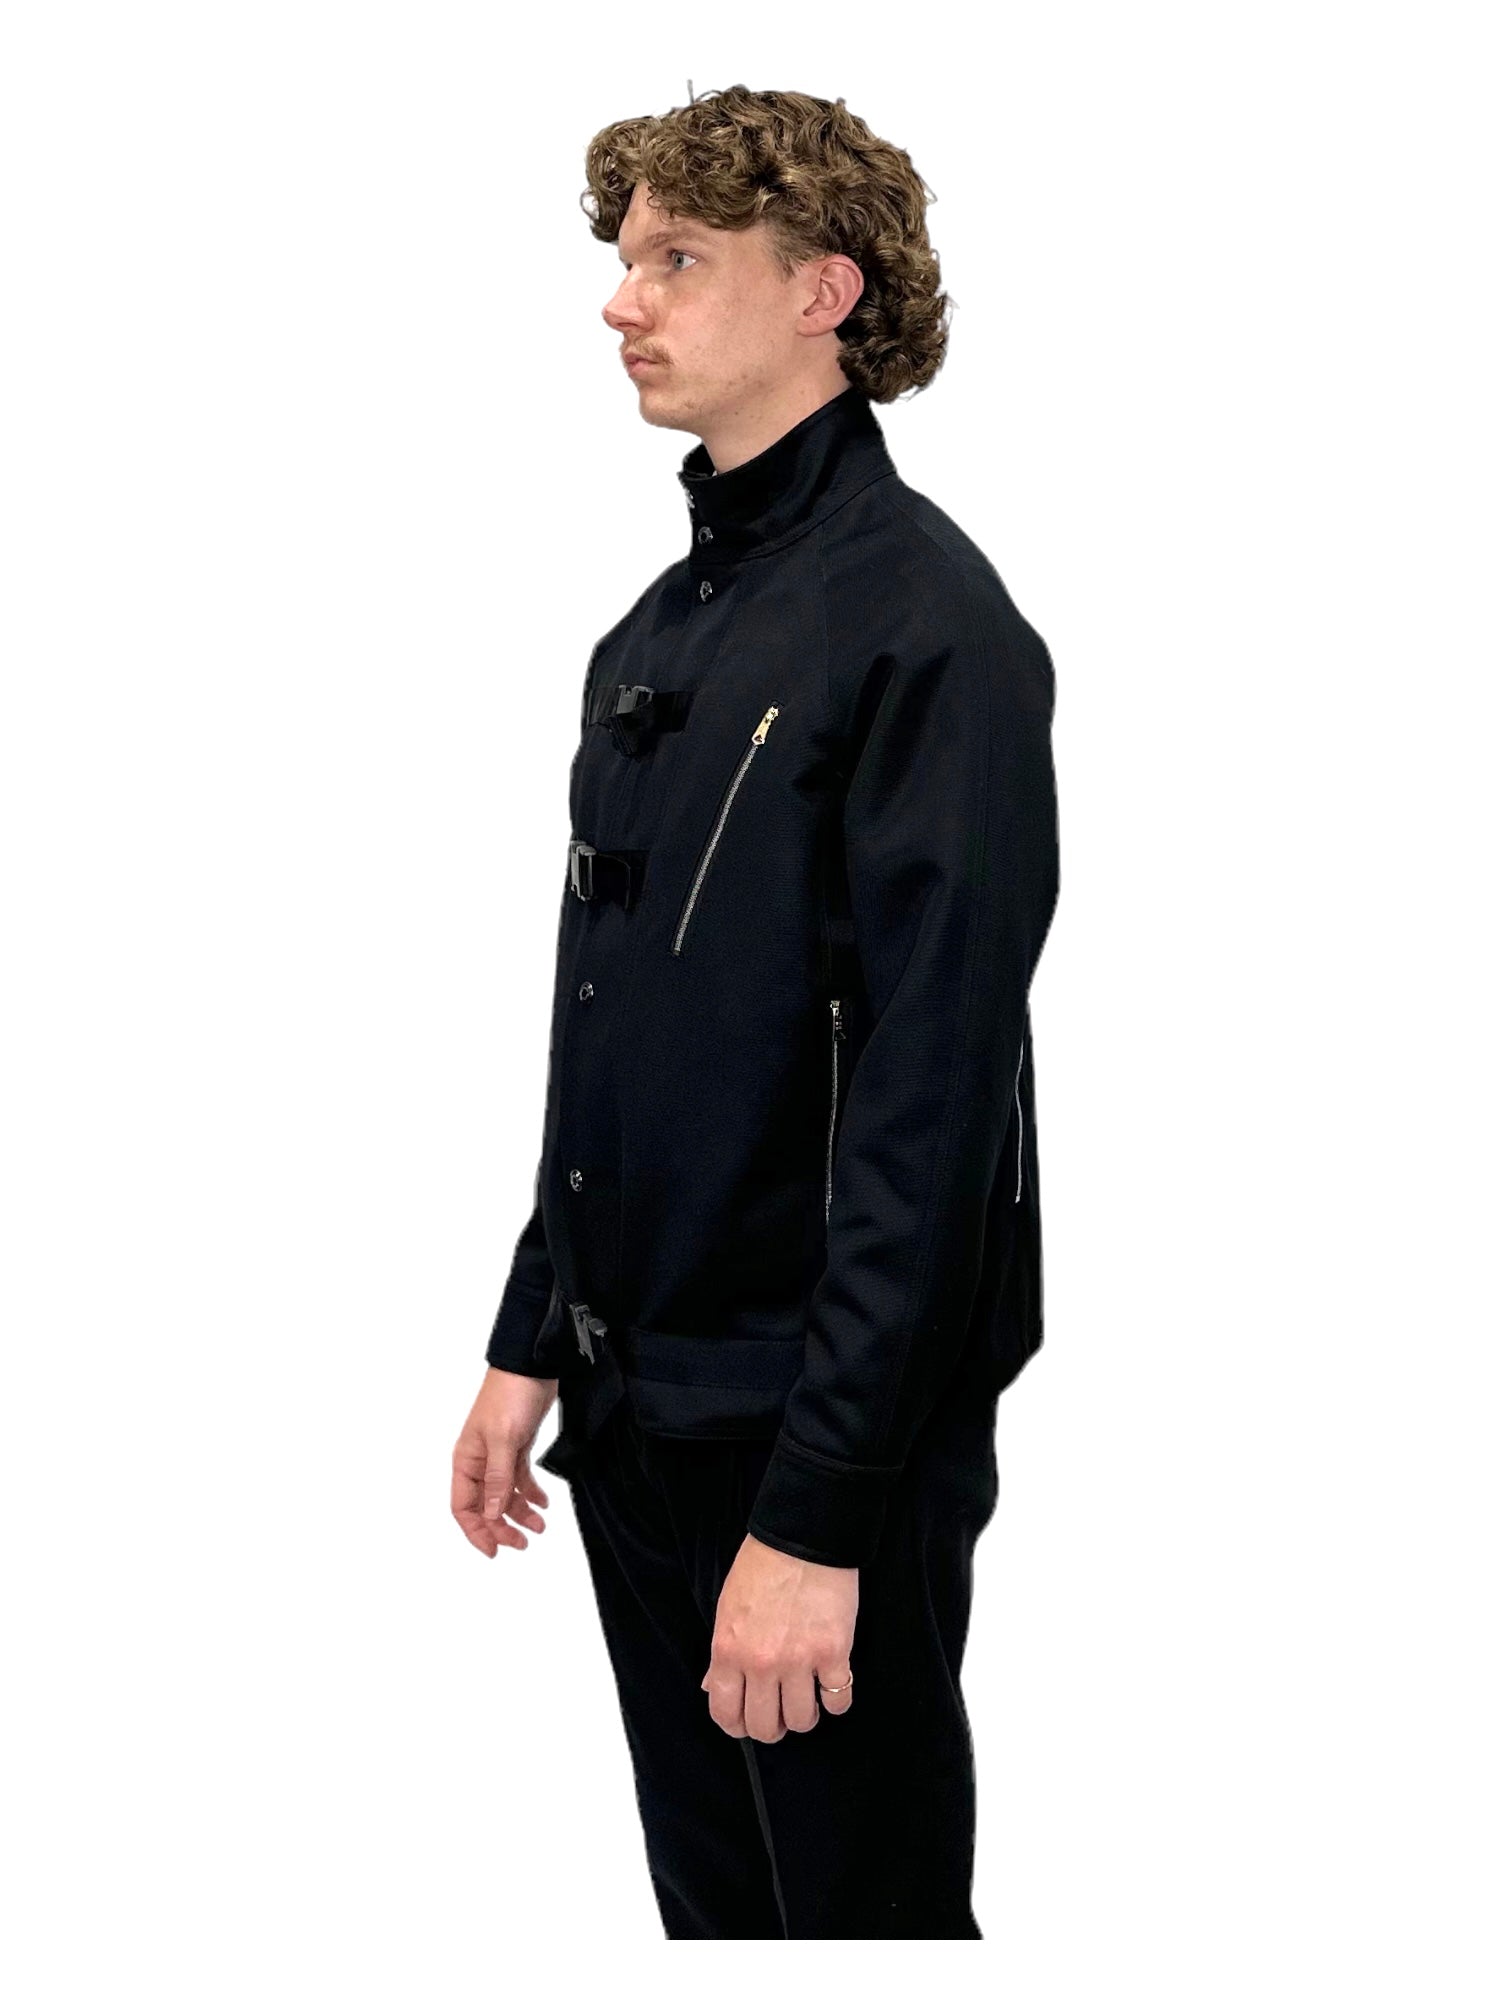 Paul Smith Black Liner Military Blouson Buckle Jacket - Genuine Design Luxury Consignment for Men. New & Pre-Owned Clothing, Shoes, & Accessories. Calgary, Canada